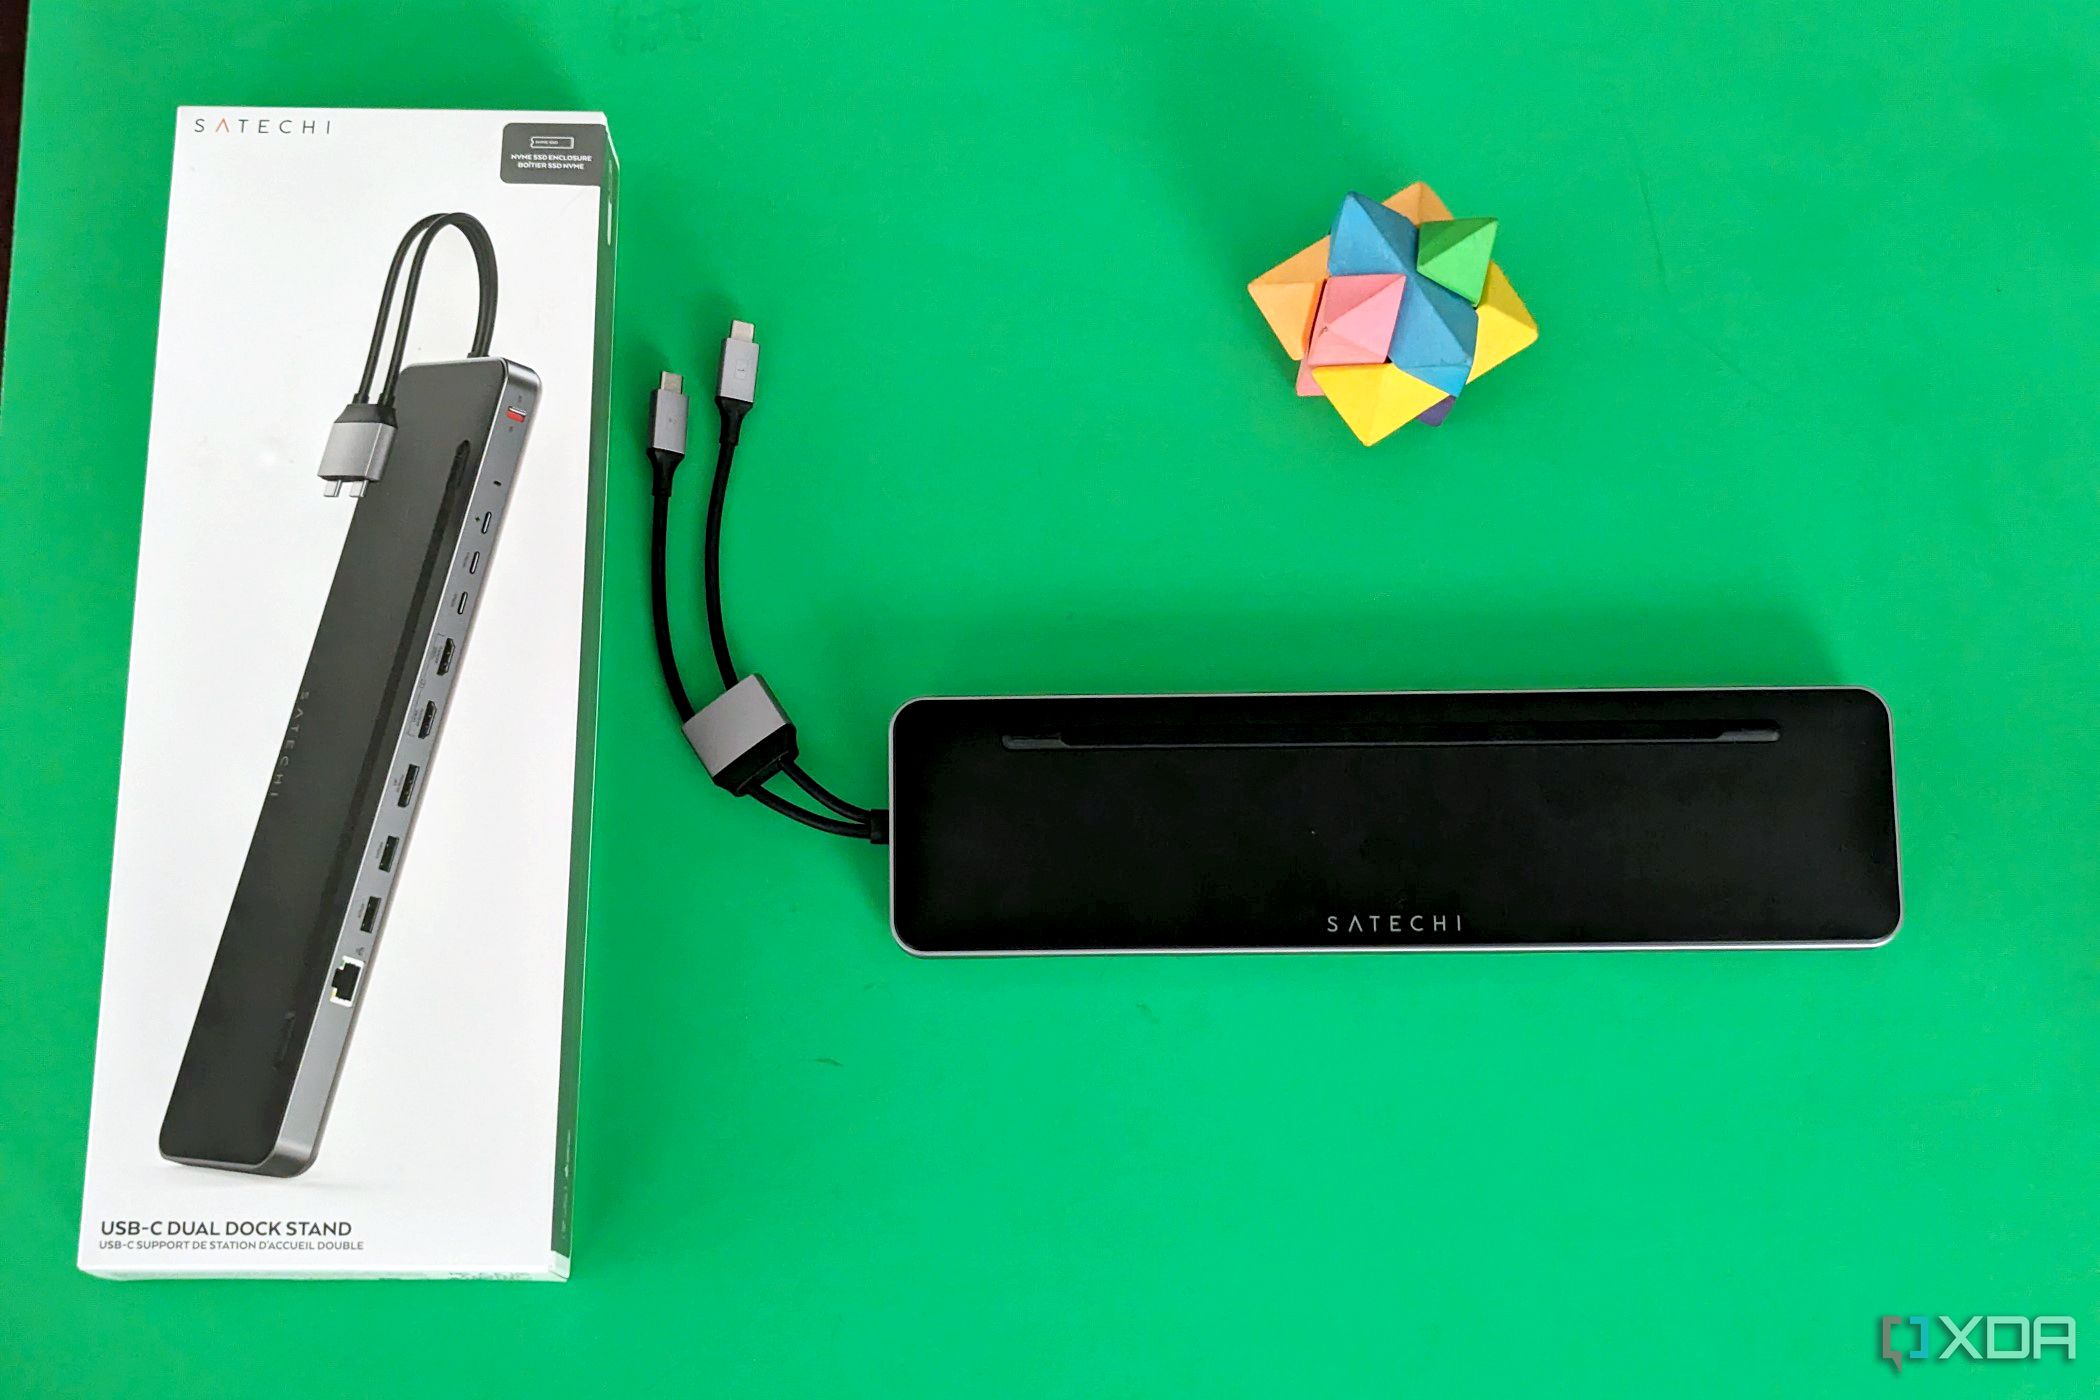 Satechi Dual Dock Stand with a box